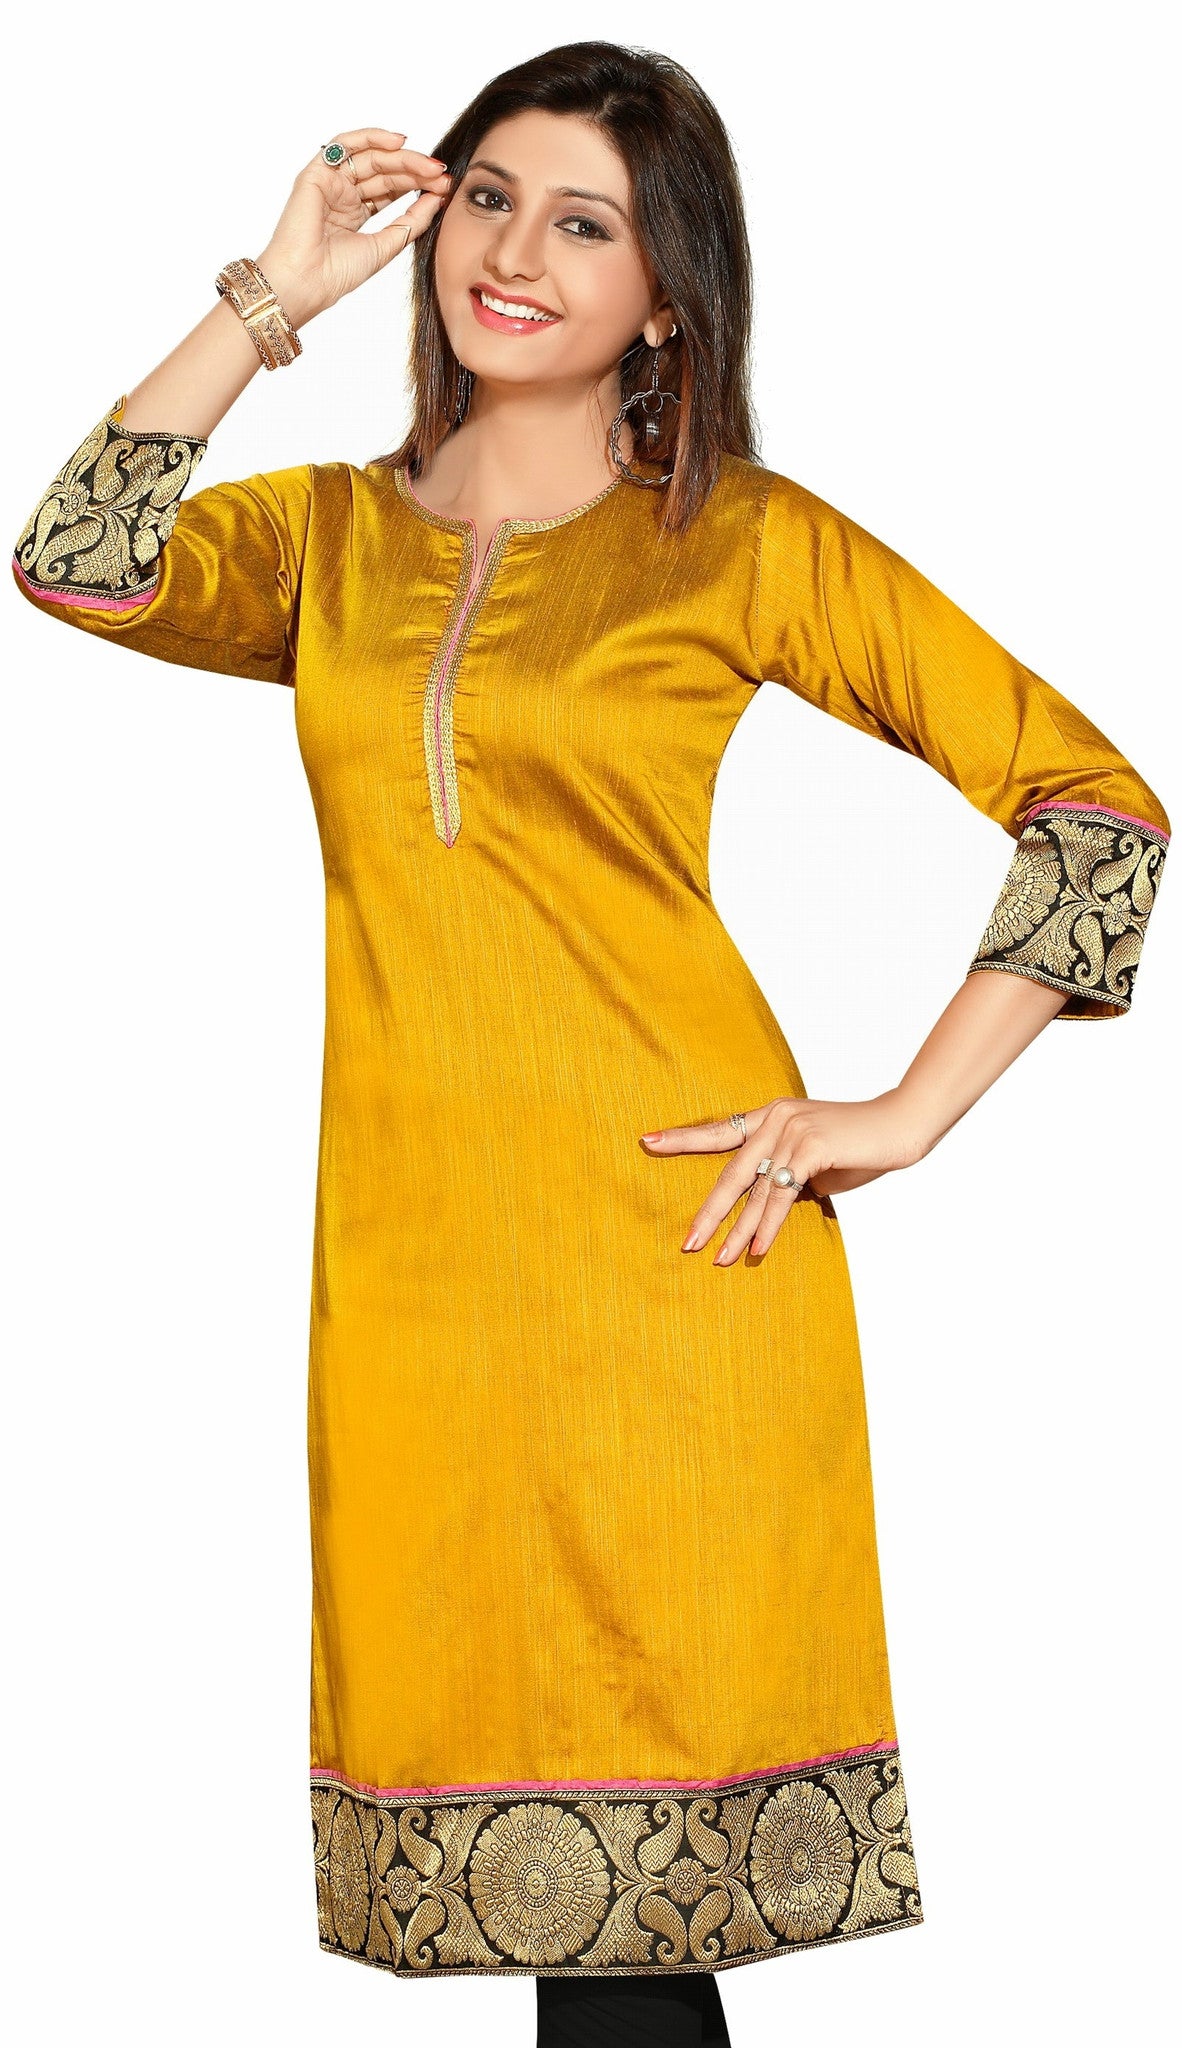 Marvelous Exotic Mustard Color Cotton Silk 3/4th Sleeves kurti - Boutique4India Inc.